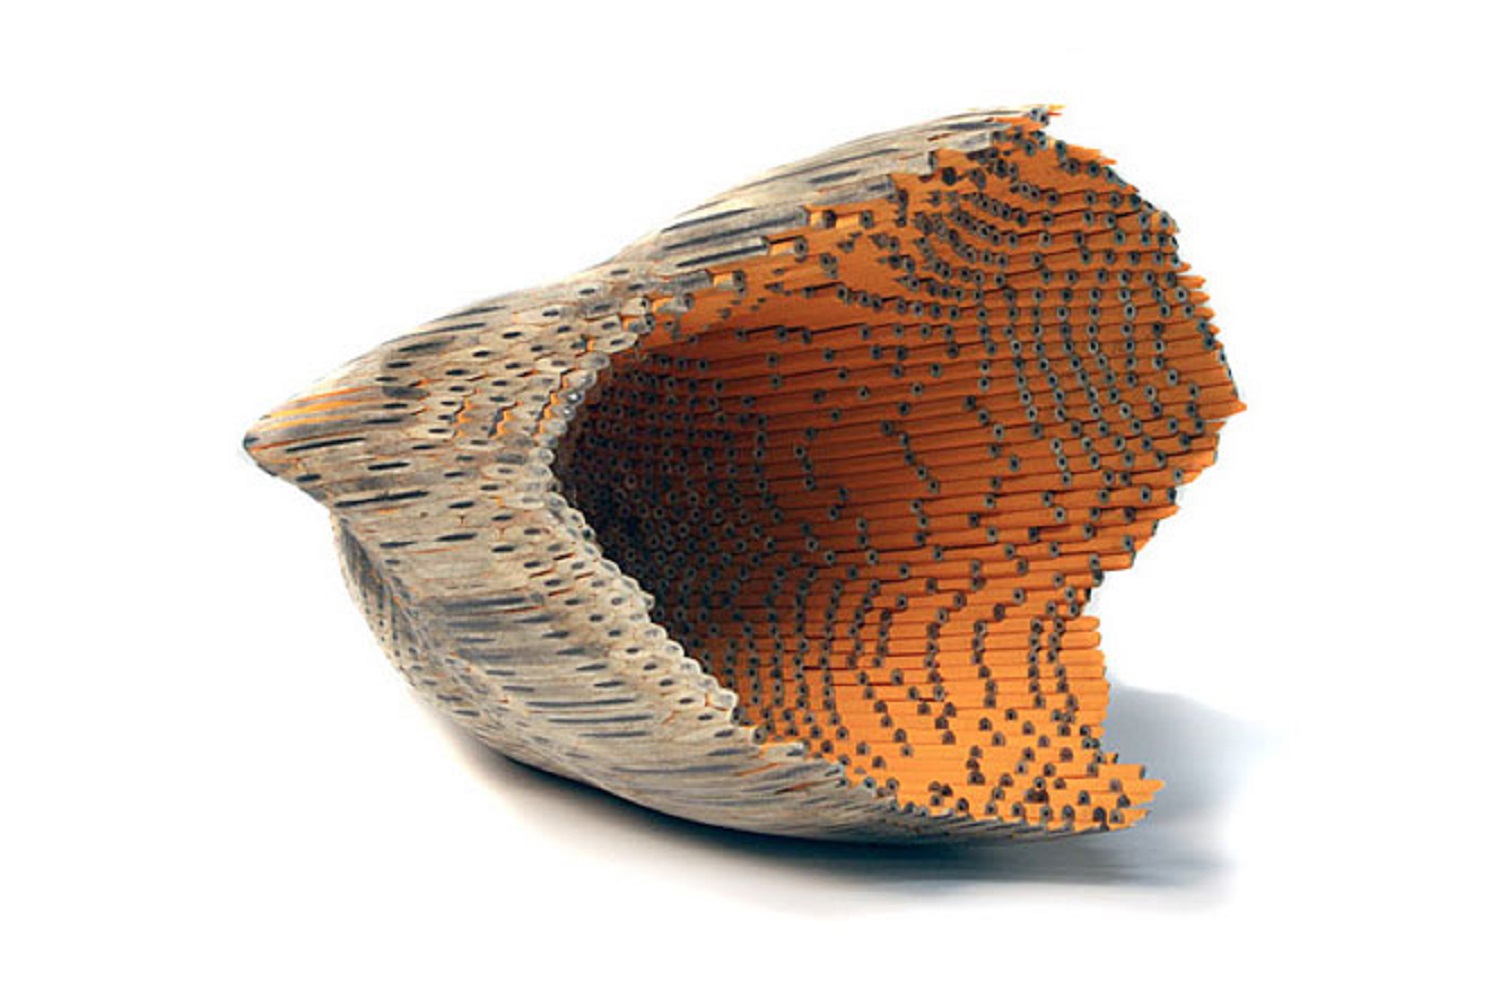 A photograph of a sculpture made out of pencils